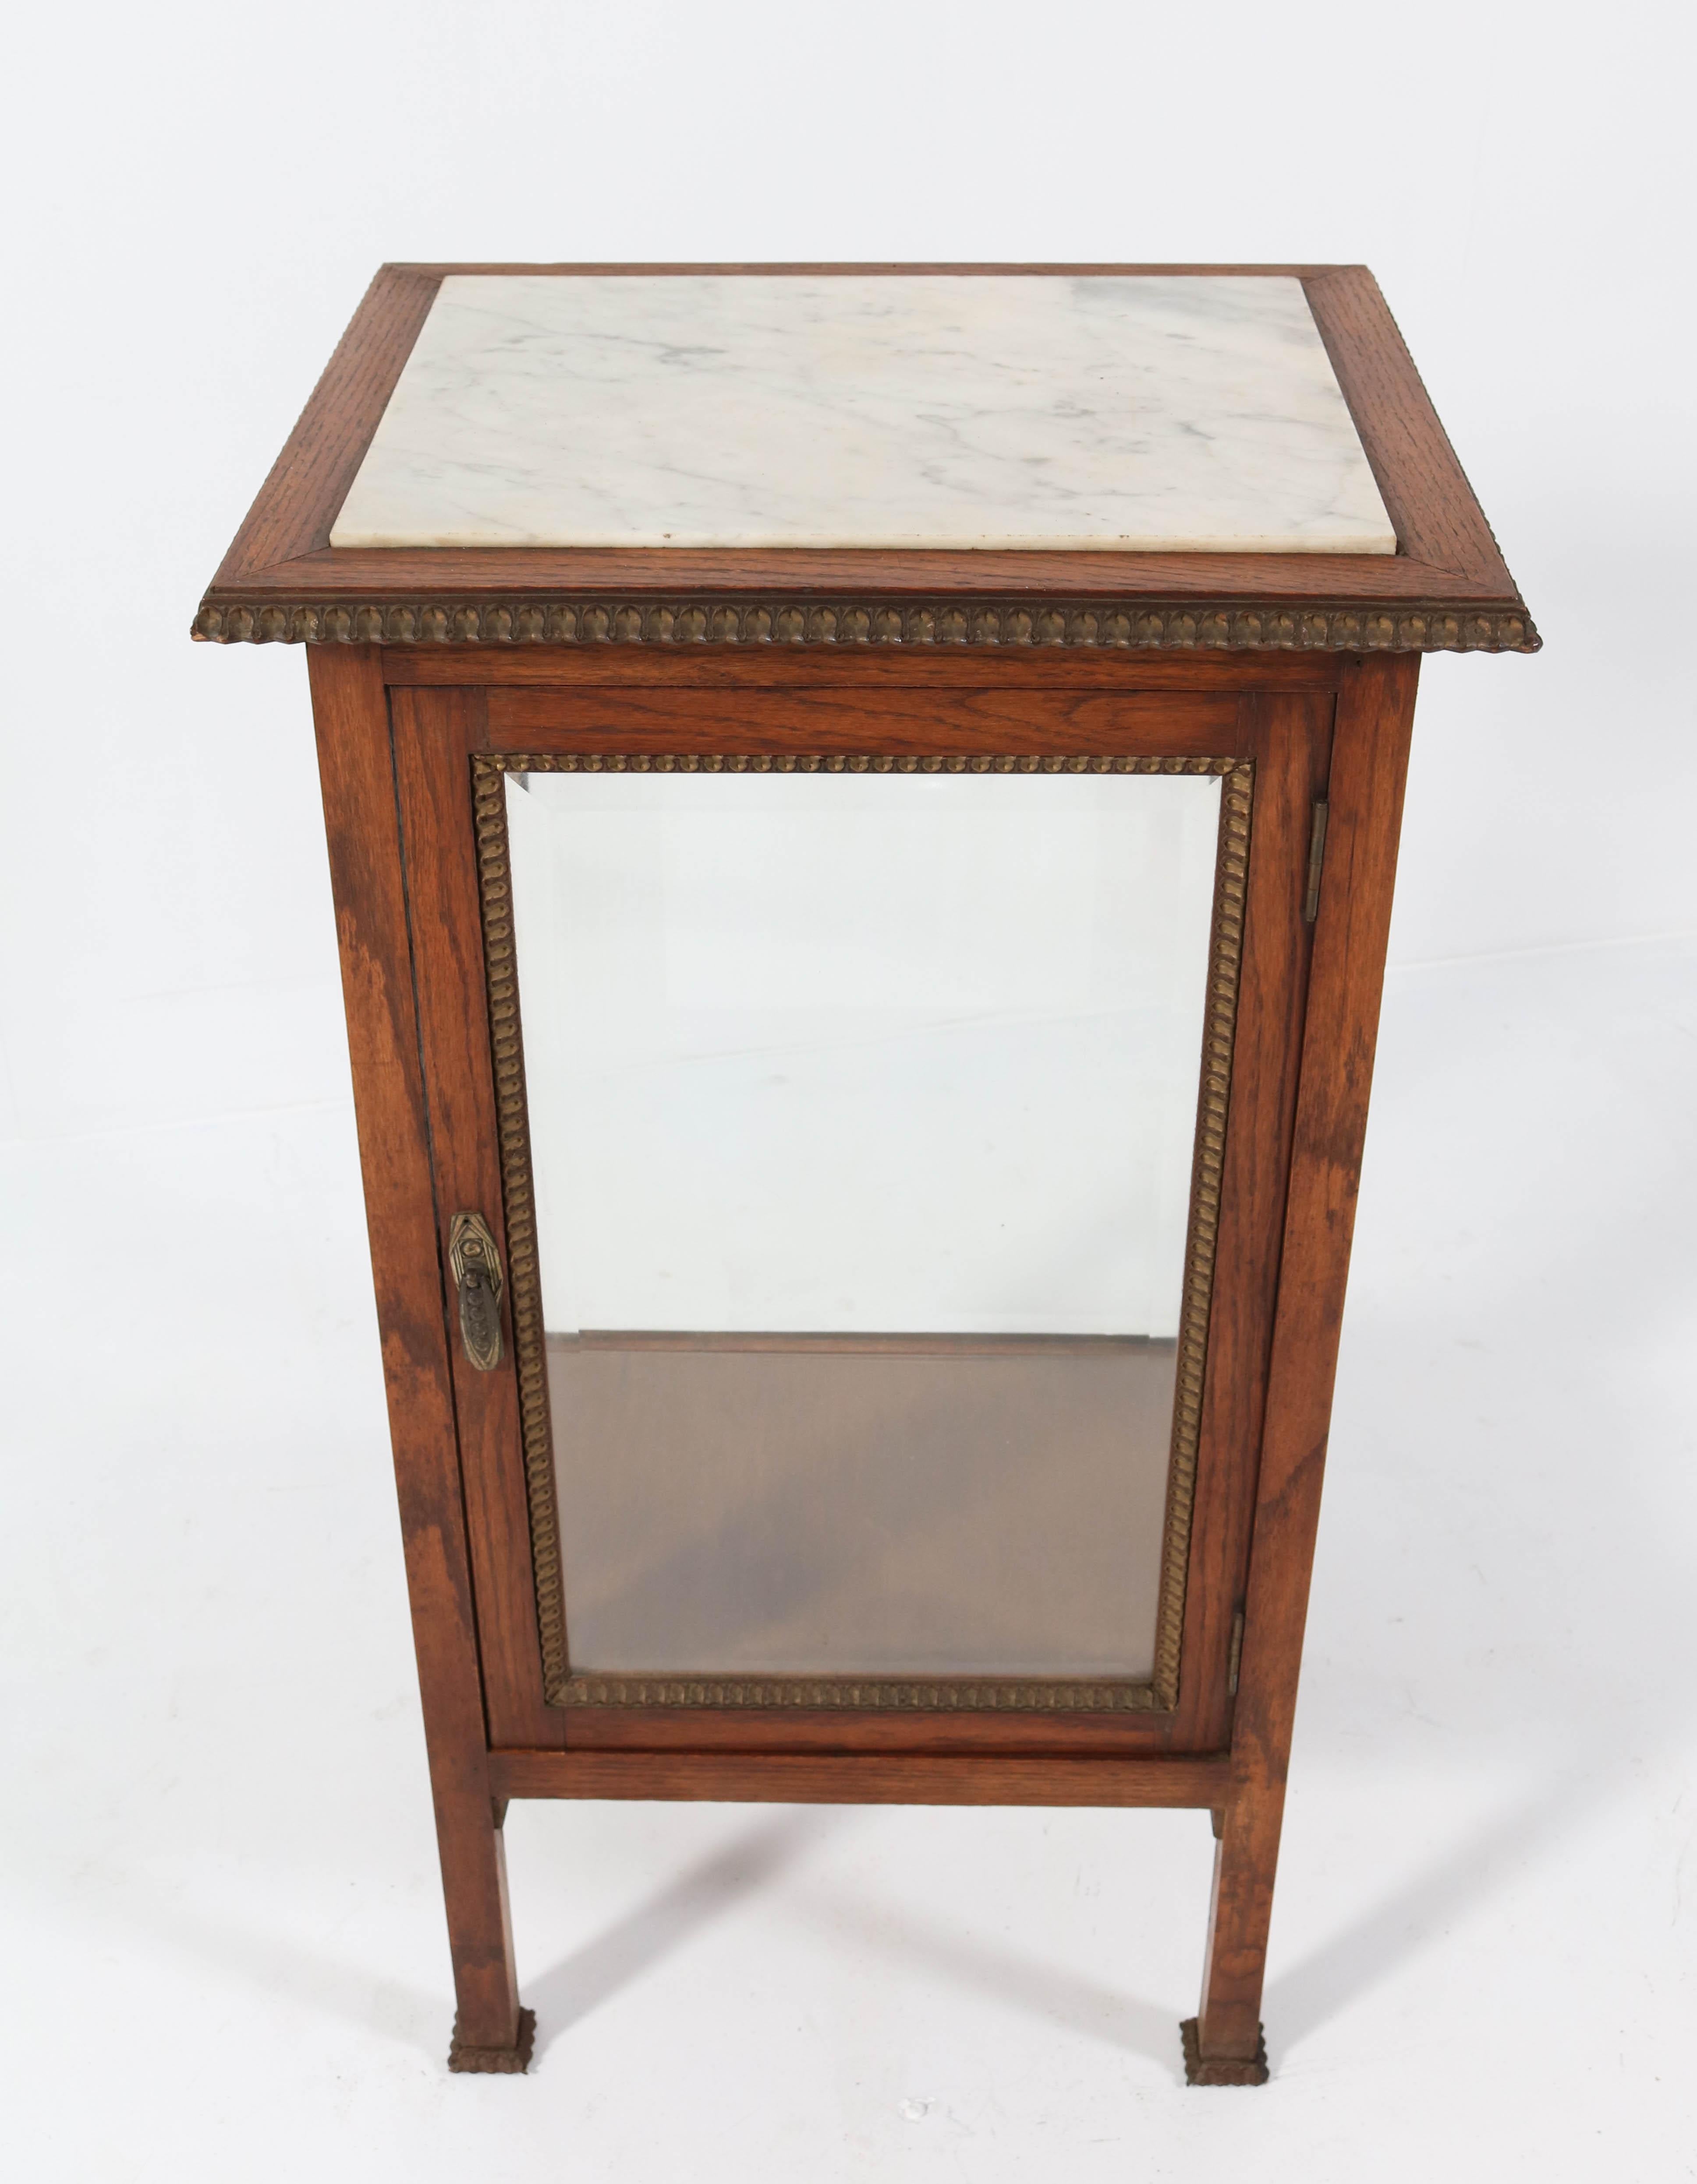 Wonderful and rare Art Deco display cabinet.
Striking French design from the thirties.
Solid oak with original beveled glass.
Original marble top.
In very good condition with minor wear consistent with age and use,
preserving a beautiful patina.